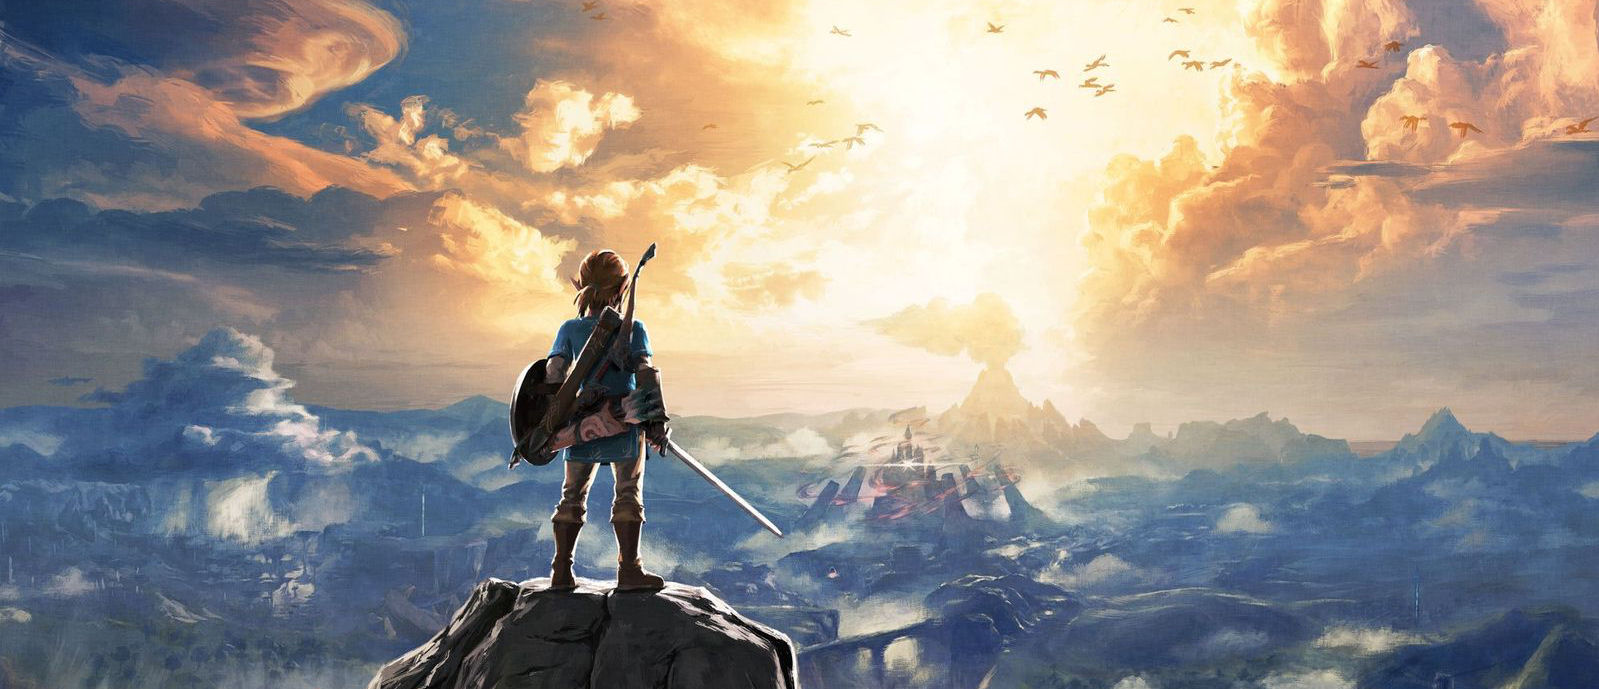 Future Zelda Games Will Also Have “Non-Linear” Stories Like ‘Breath Of The Wild’